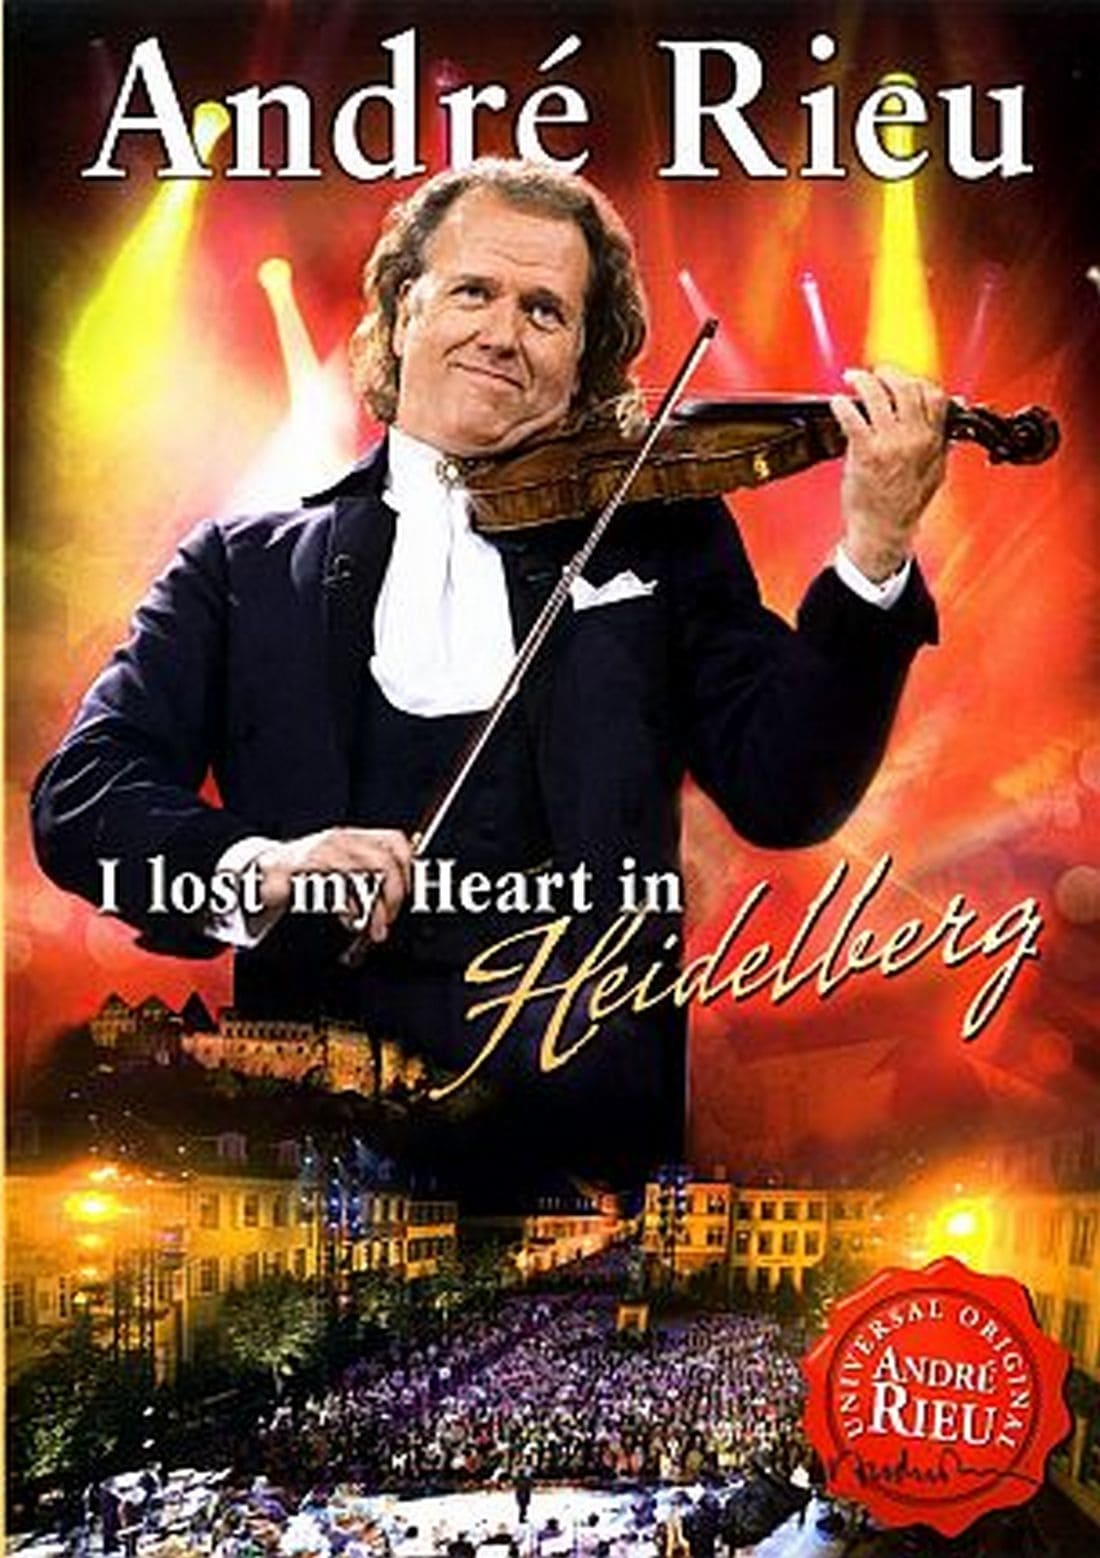 André Rieu - I lost my Heart in Heidelberg